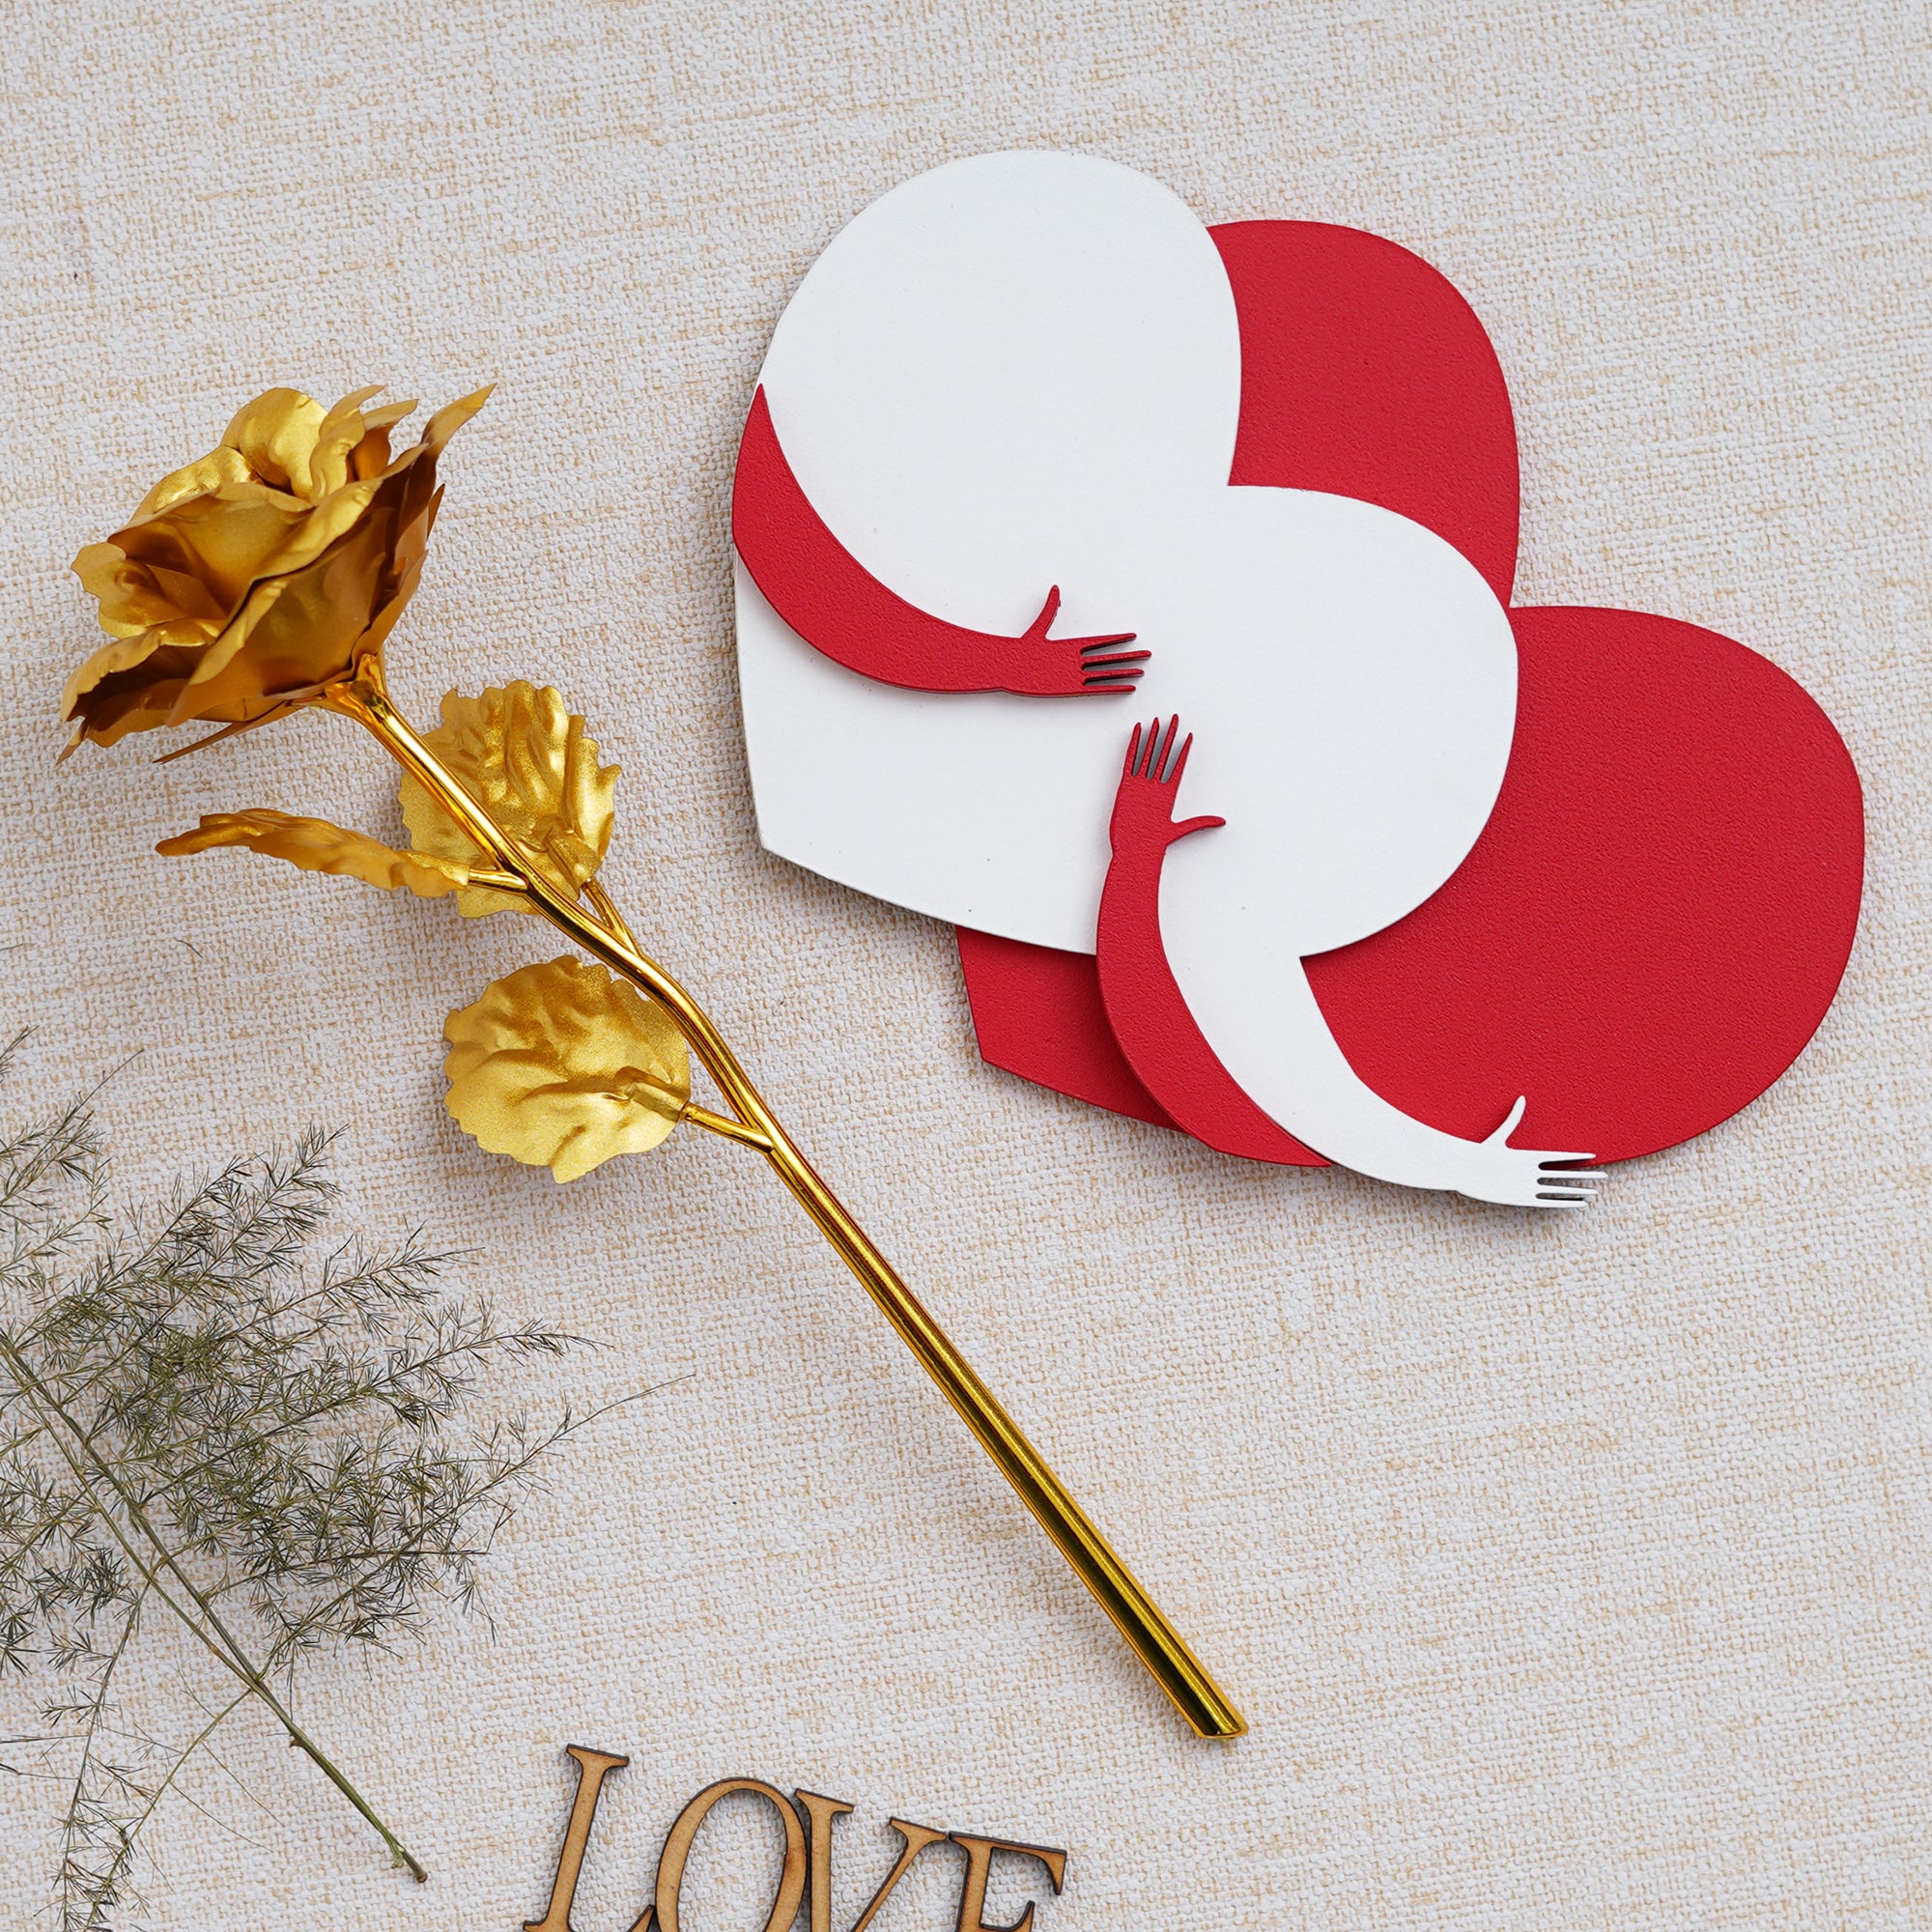 Valentine Combo of Golden Rose Gift Set, Red and White Heart Hugging Each Other Gift Set